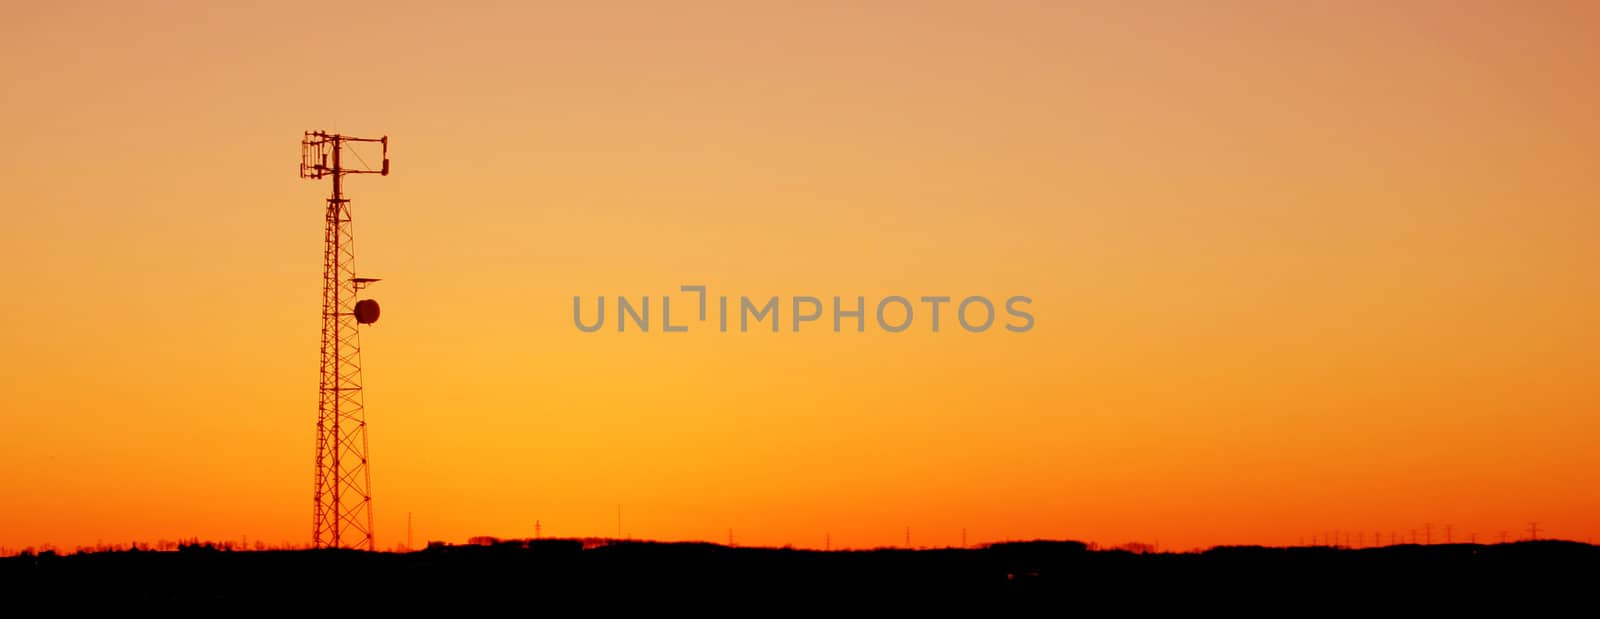 Orange Cell Tower Silhouette by ca2hill